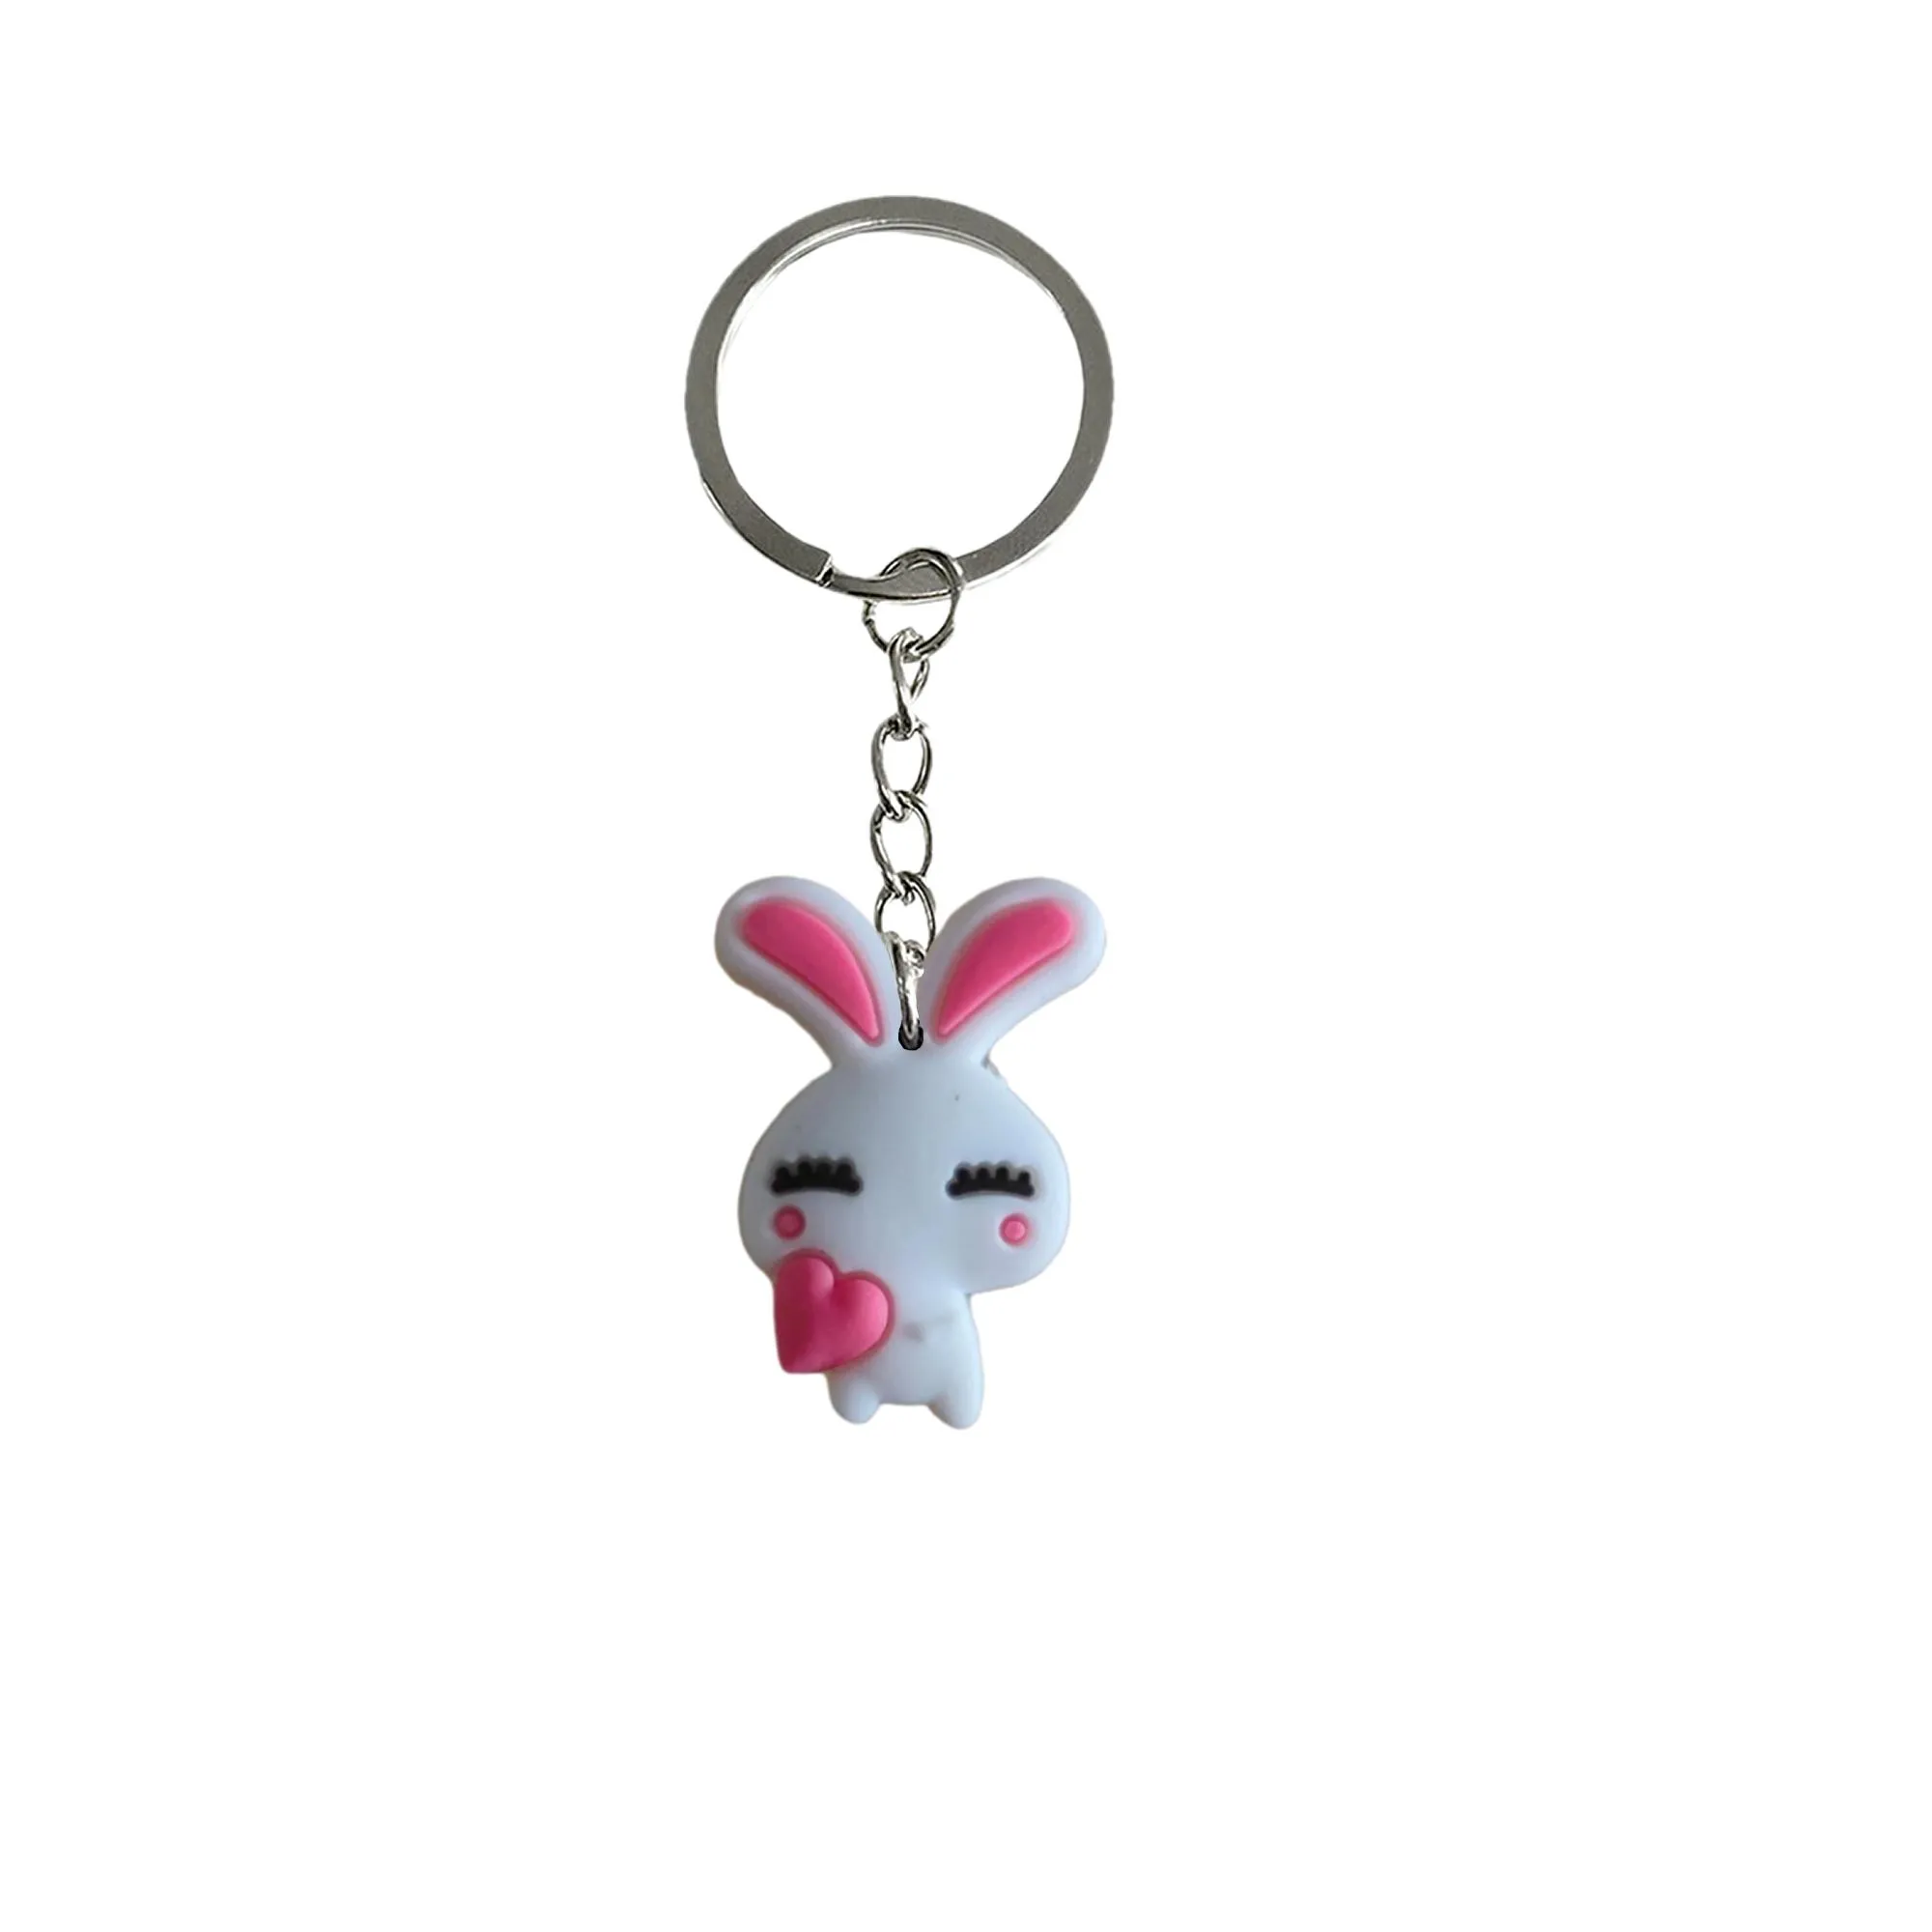 rabbit keychain boys keychains key ring for women chain accessories backpack handbag and car gift valentines day keyring suitable schoolbag men party favors bag